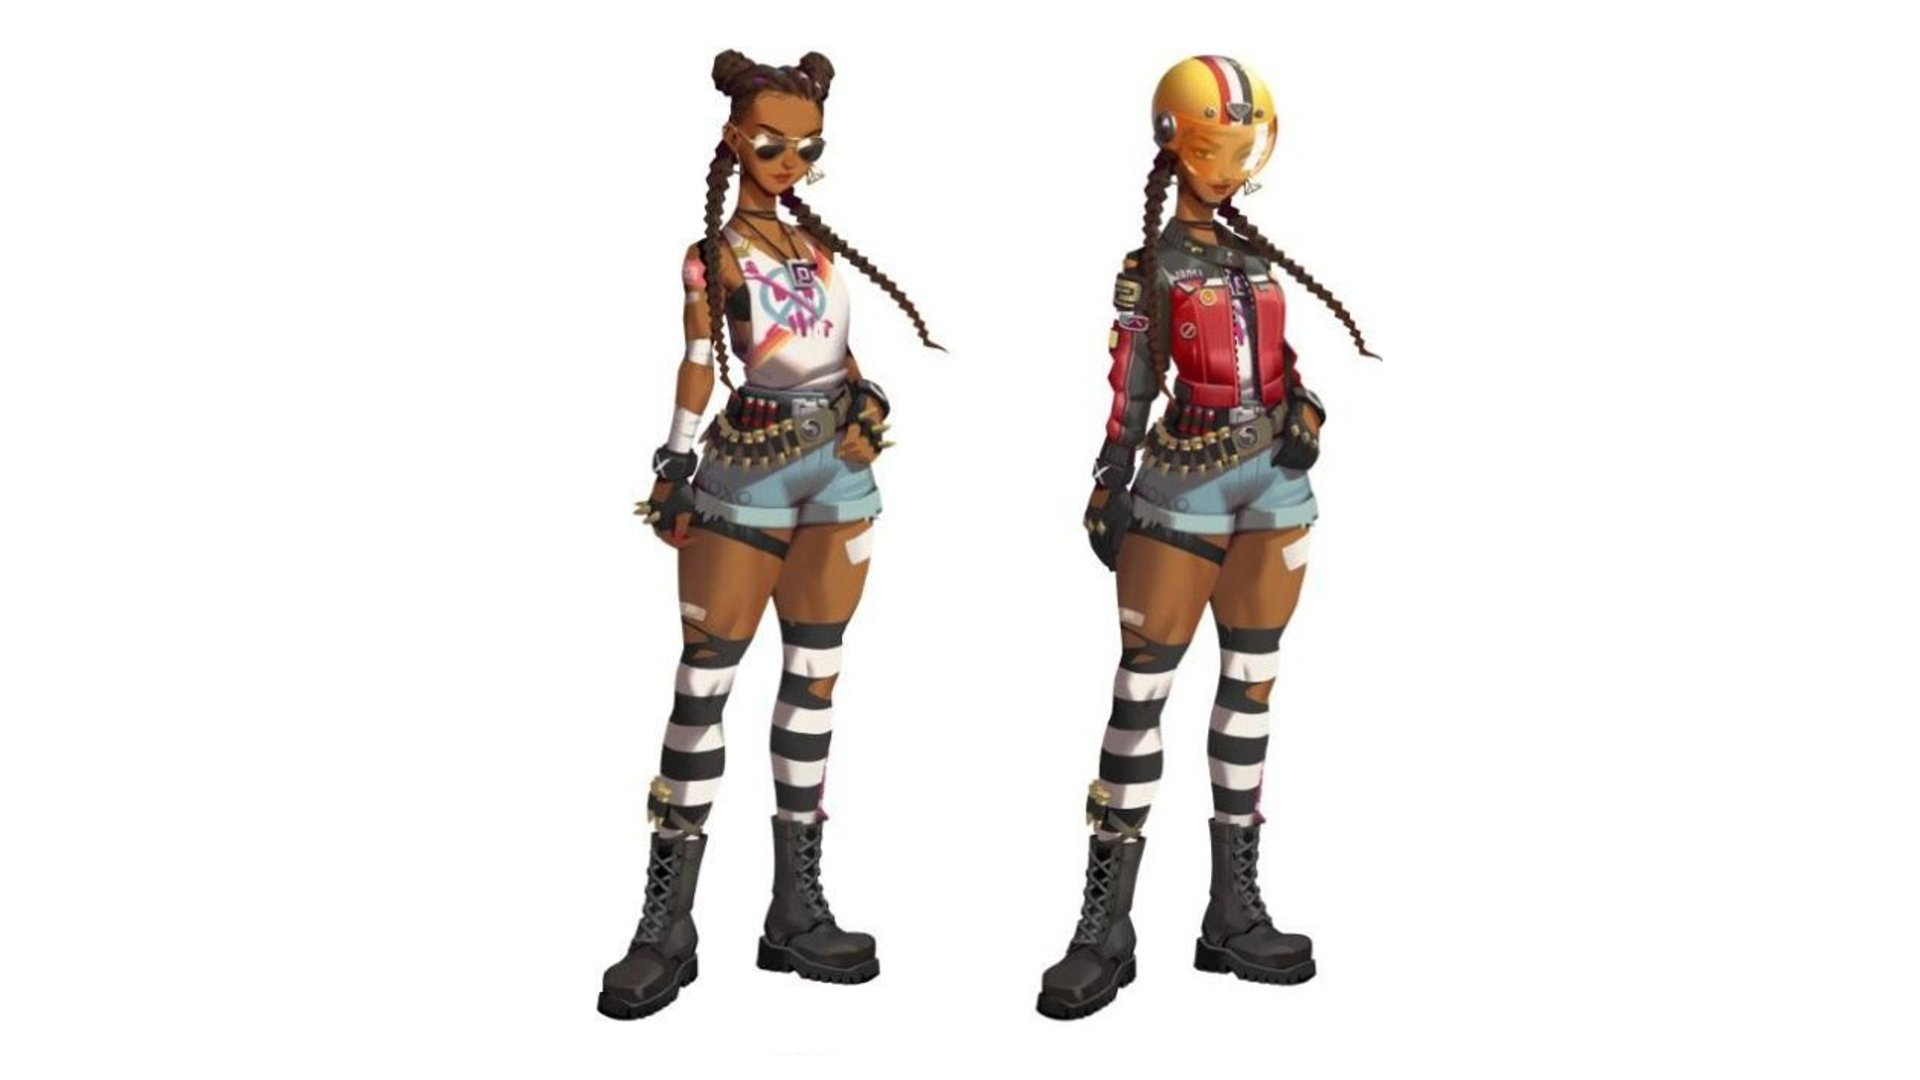 A new survey from Epic Games showed outfits that can get in Fortnite  